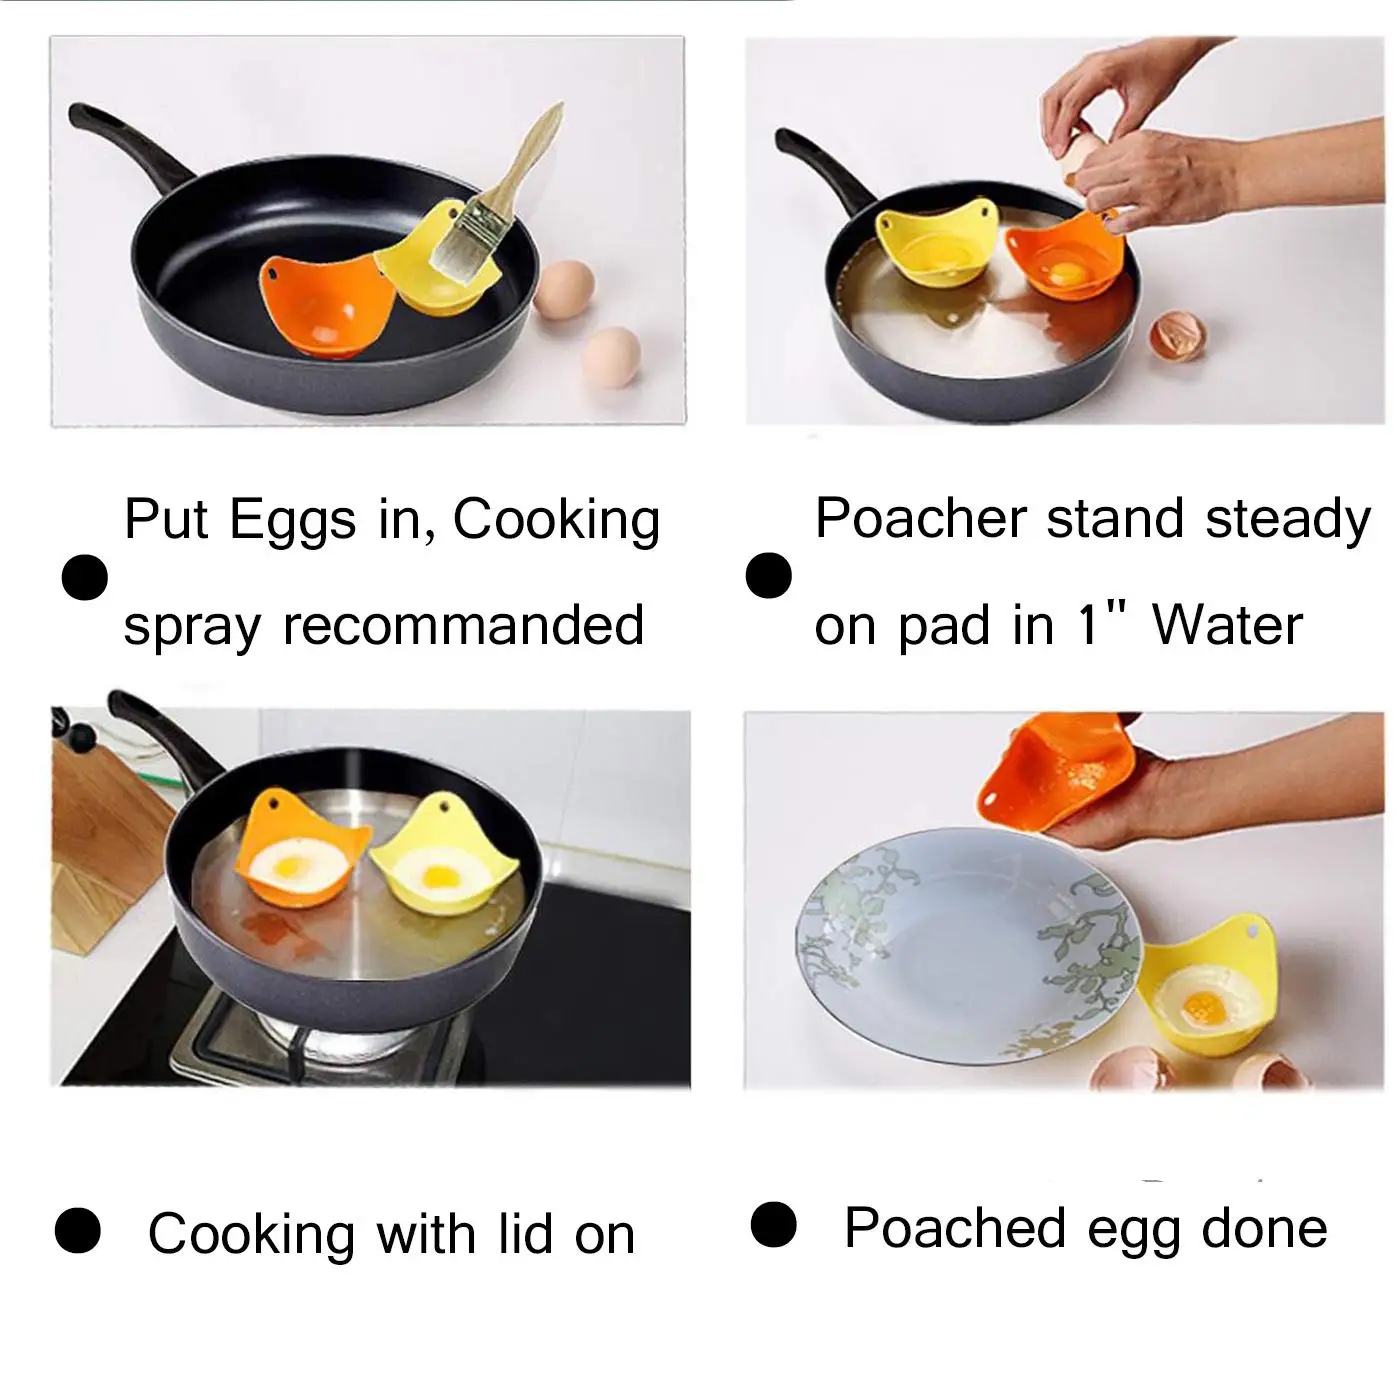 4 Pcs Poached Egg Cooker with Ring Standers Silicone Egg Poacher Cup for Microwave Or Stovetop Egg Poaching,and 4 Pcs Non-Stick Round Fried Egg Rings Molds+2brush Egg Poacher and Egg Ring 10Pcs Set 